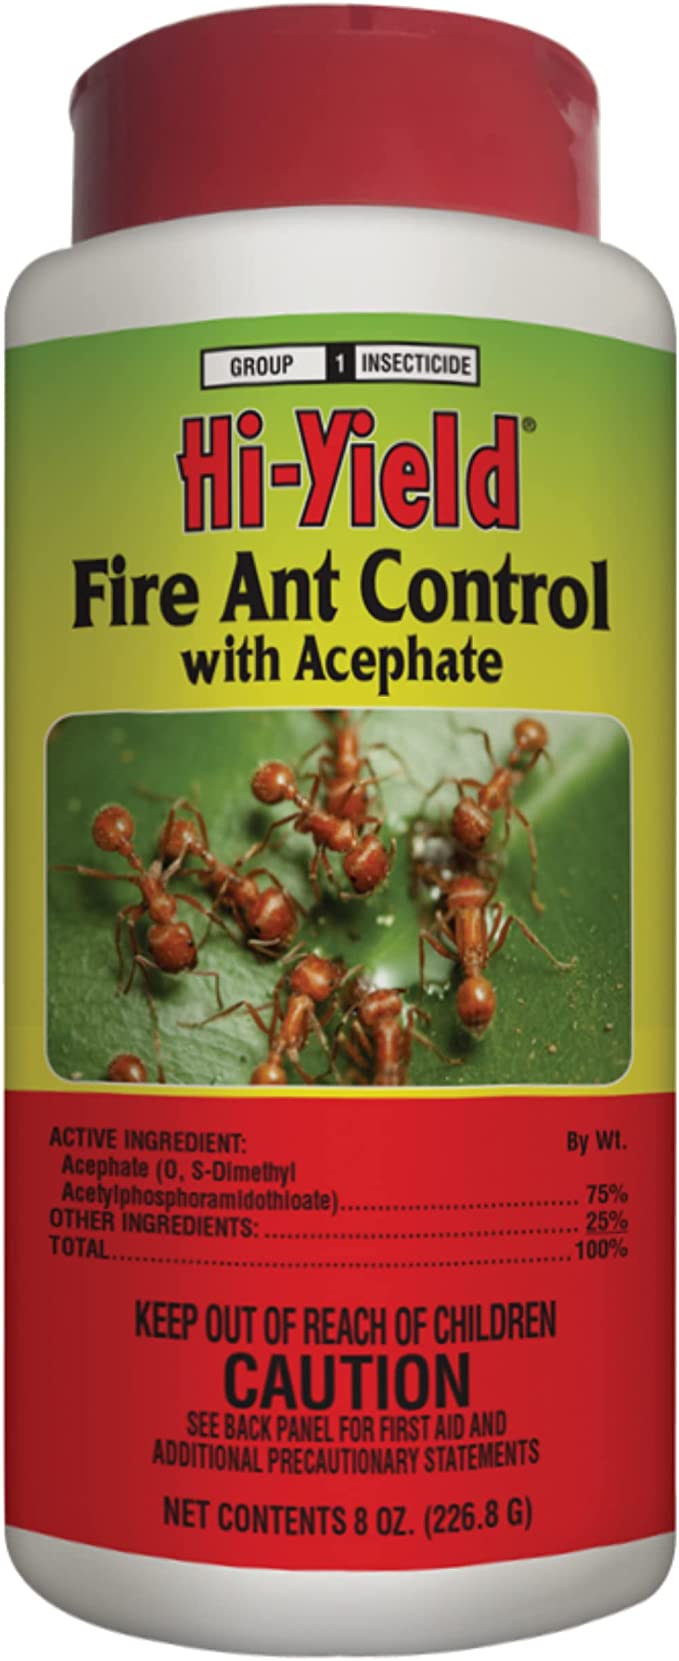 Hi Yield Fire Ant Control with Acephate, 8 oz